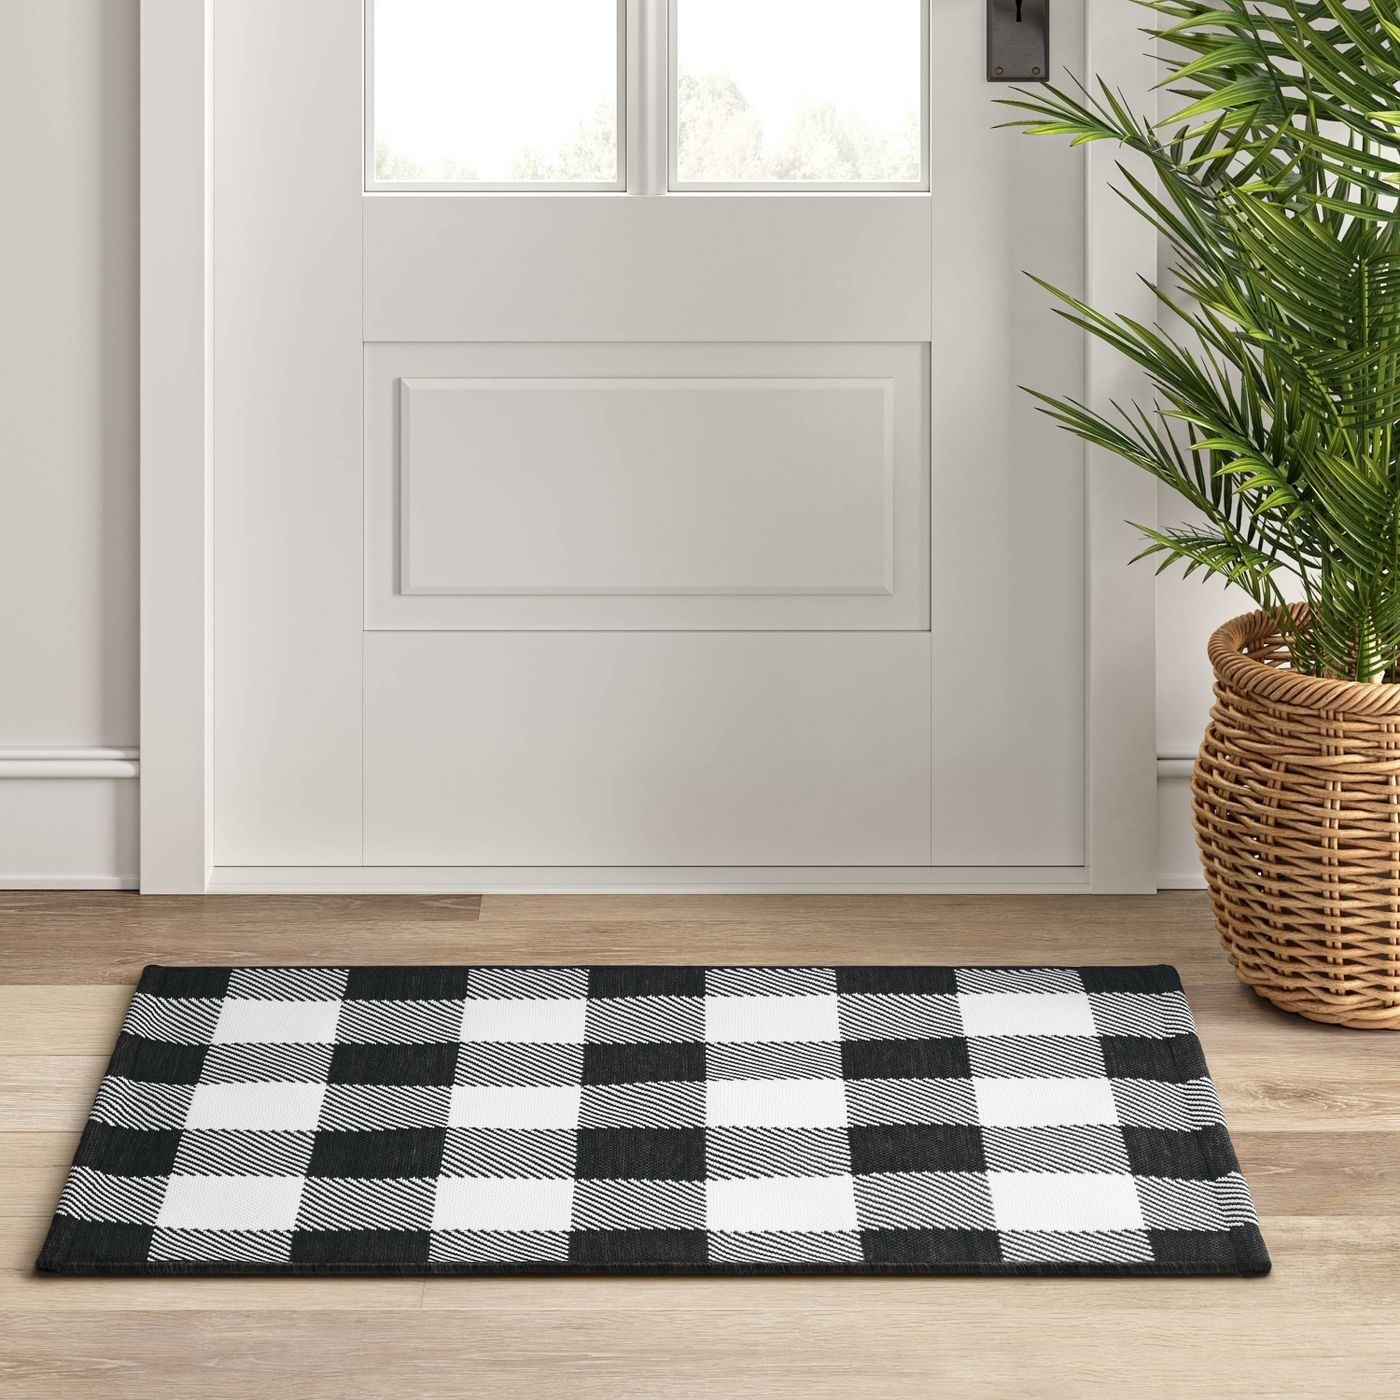 the black and white rug in front of a door